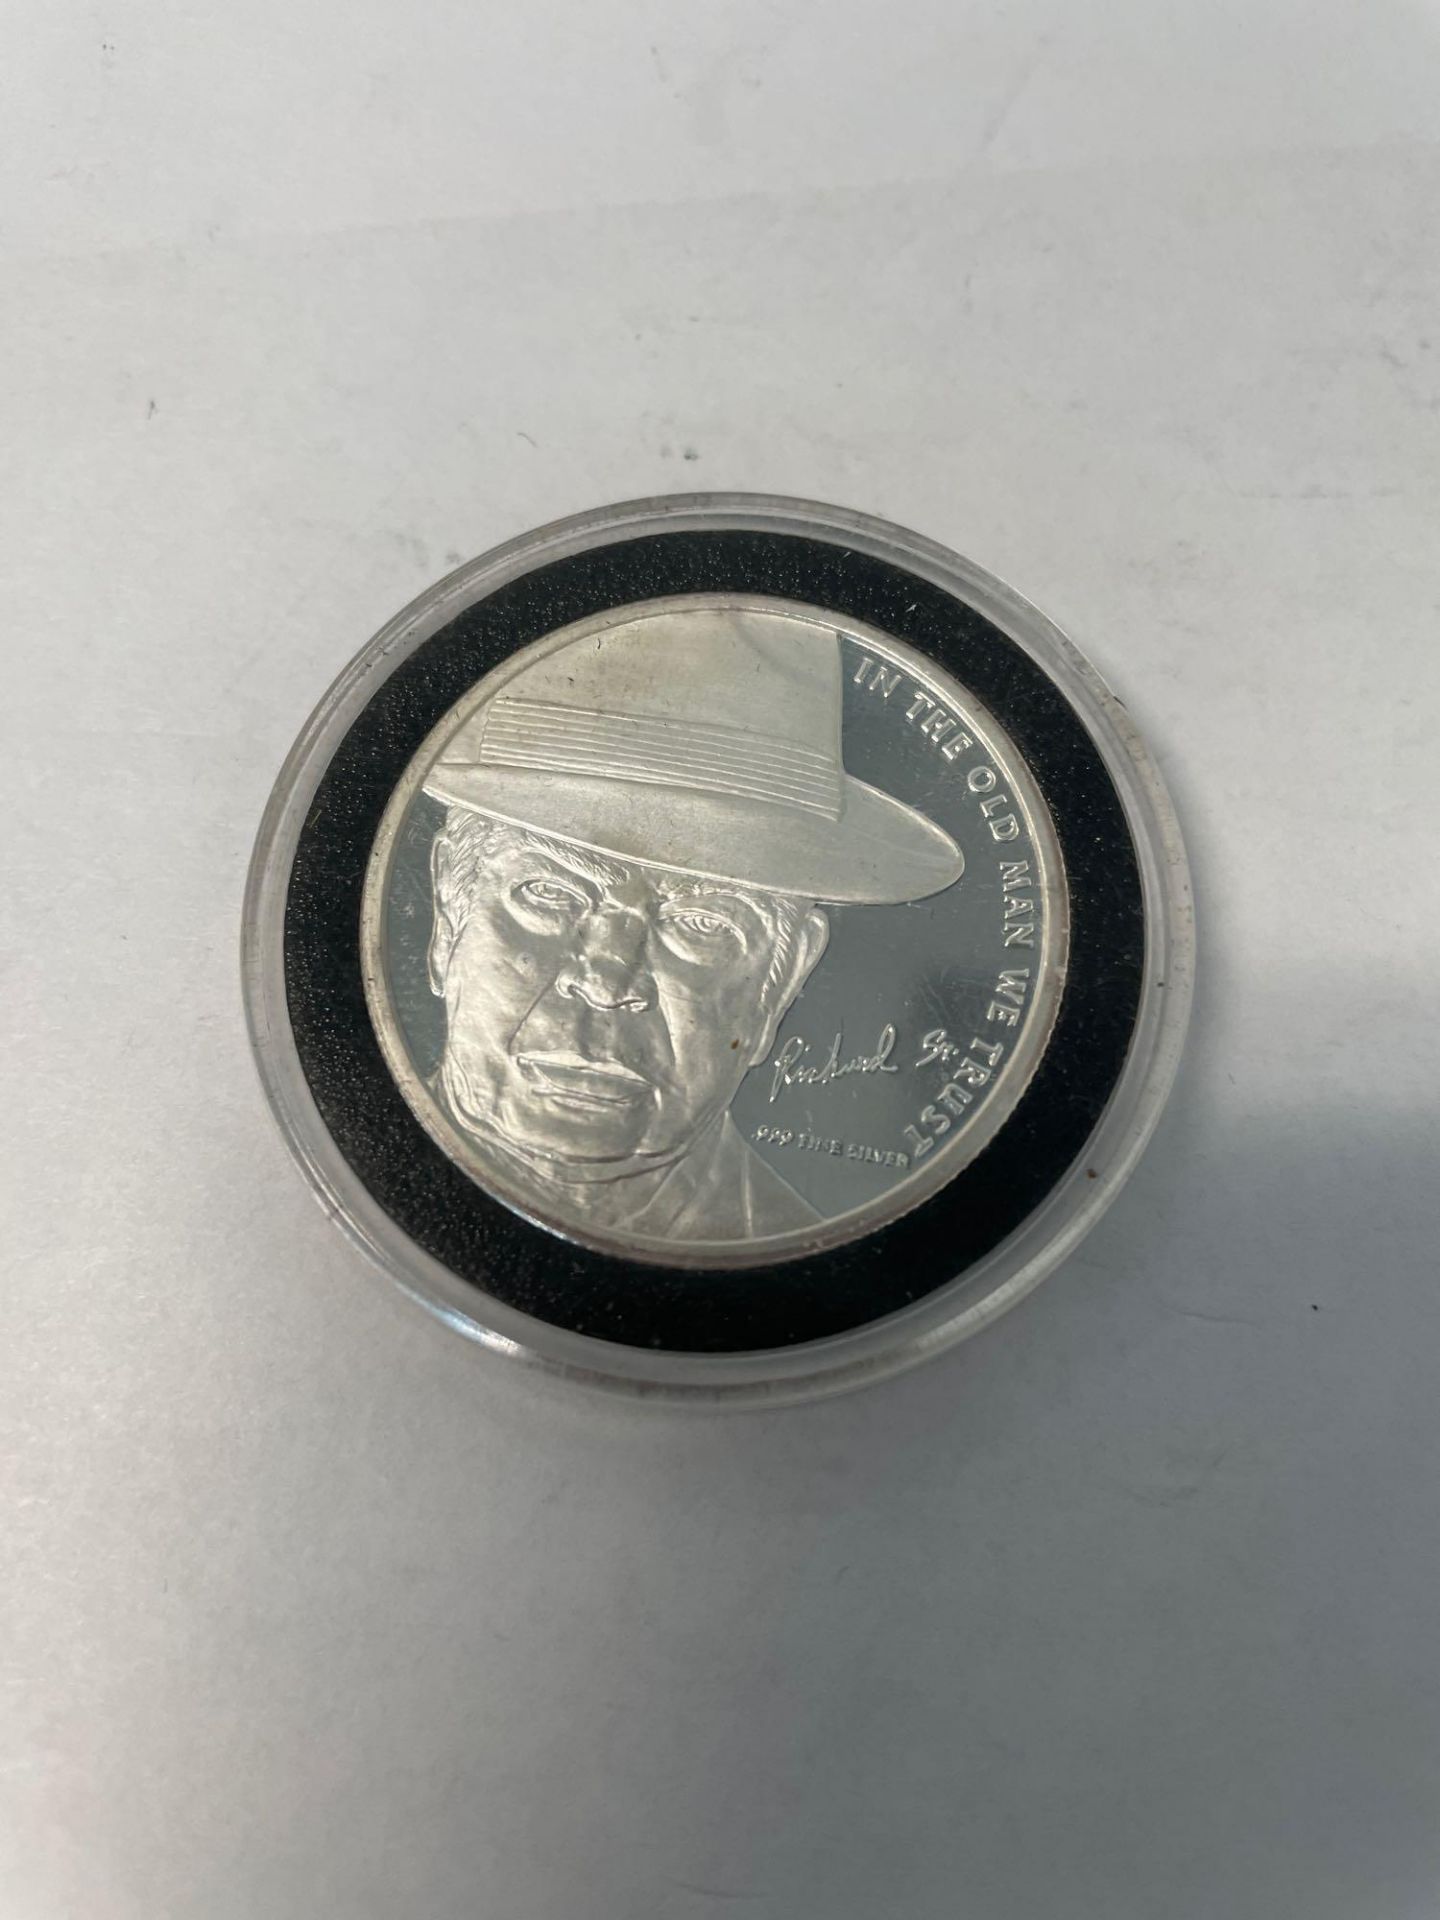 The Old Man Silver Coin